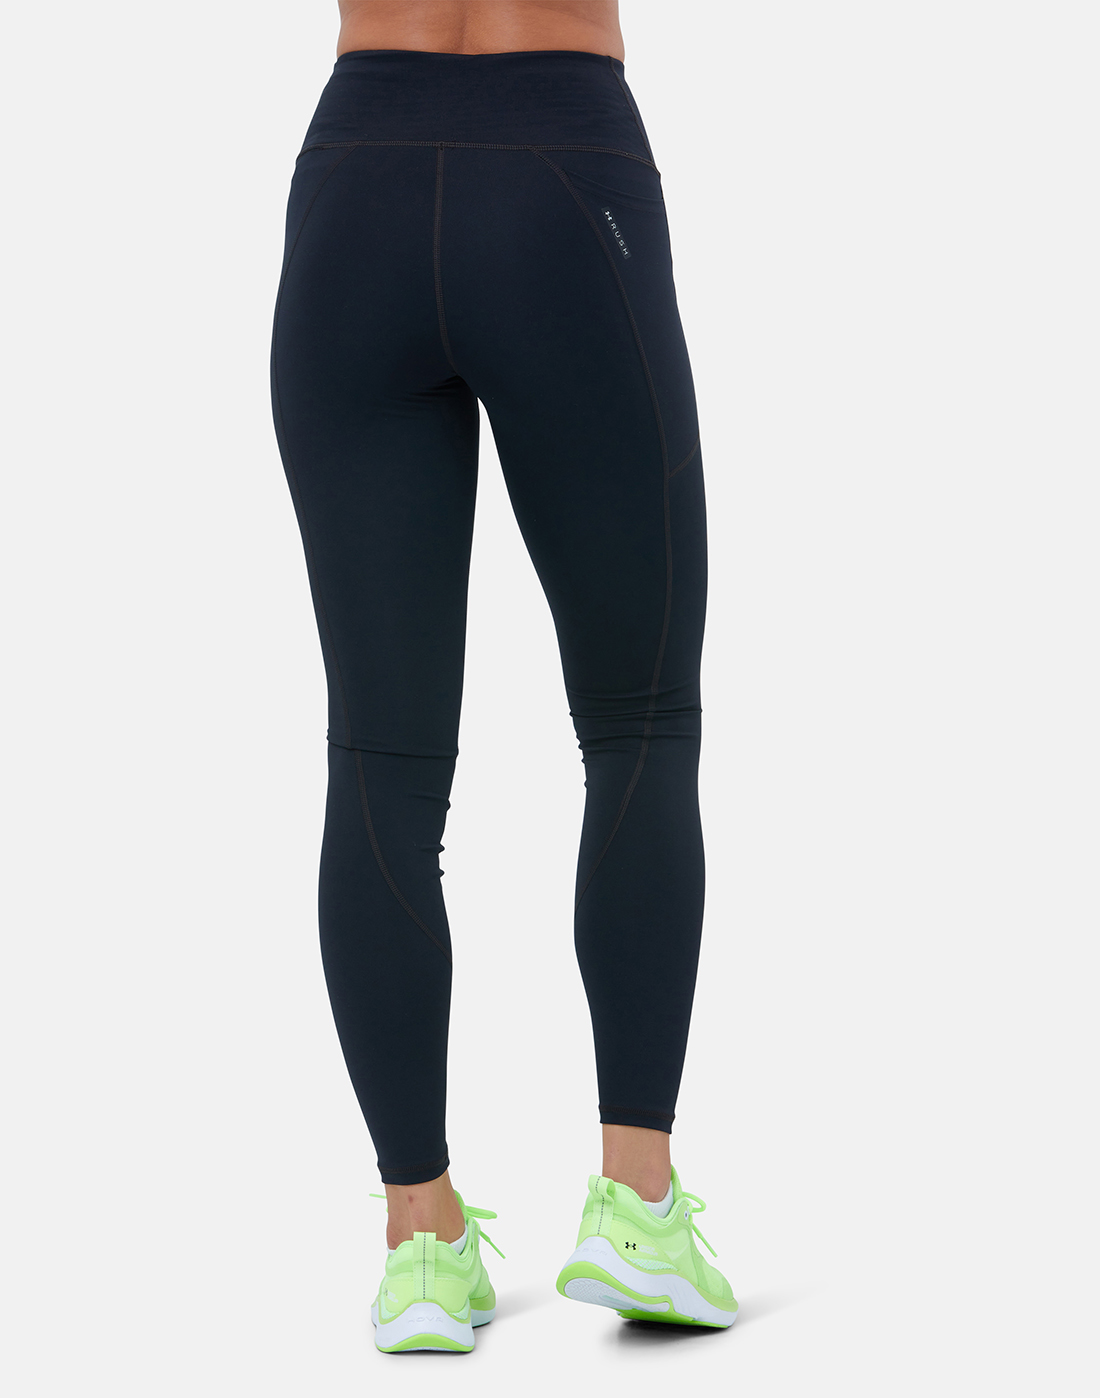 Under Armour Womens Rush Leggings - Black | Life Style Sports IE